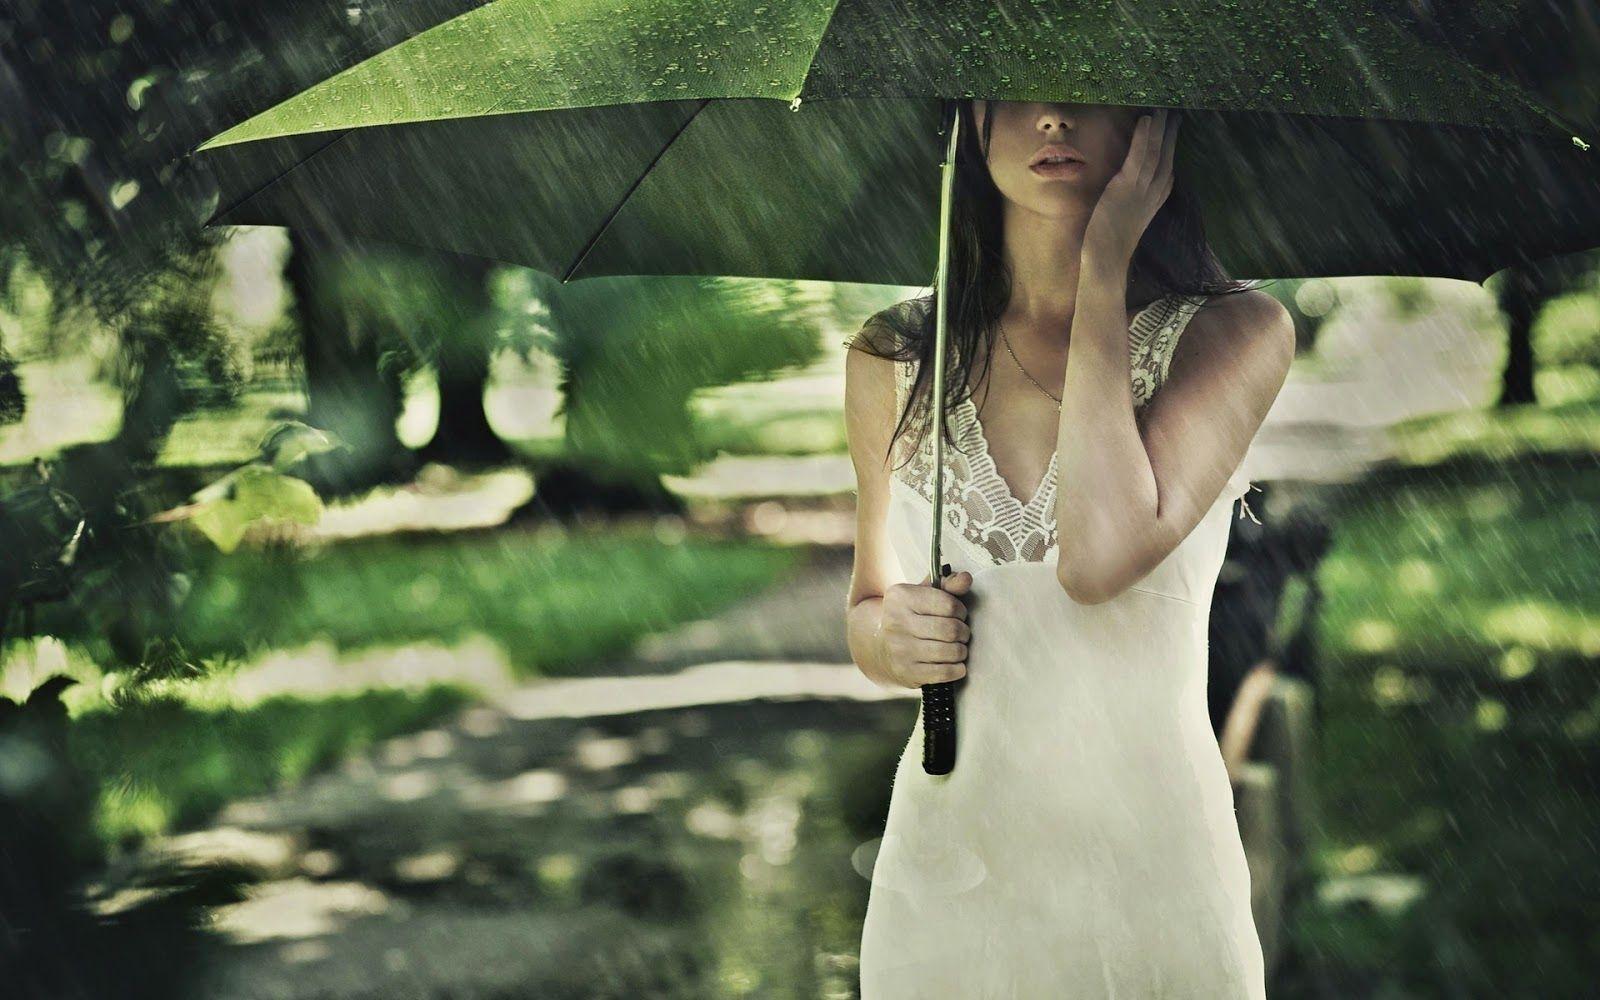 Girl in rain wallpaper. Most beautiful places in the world